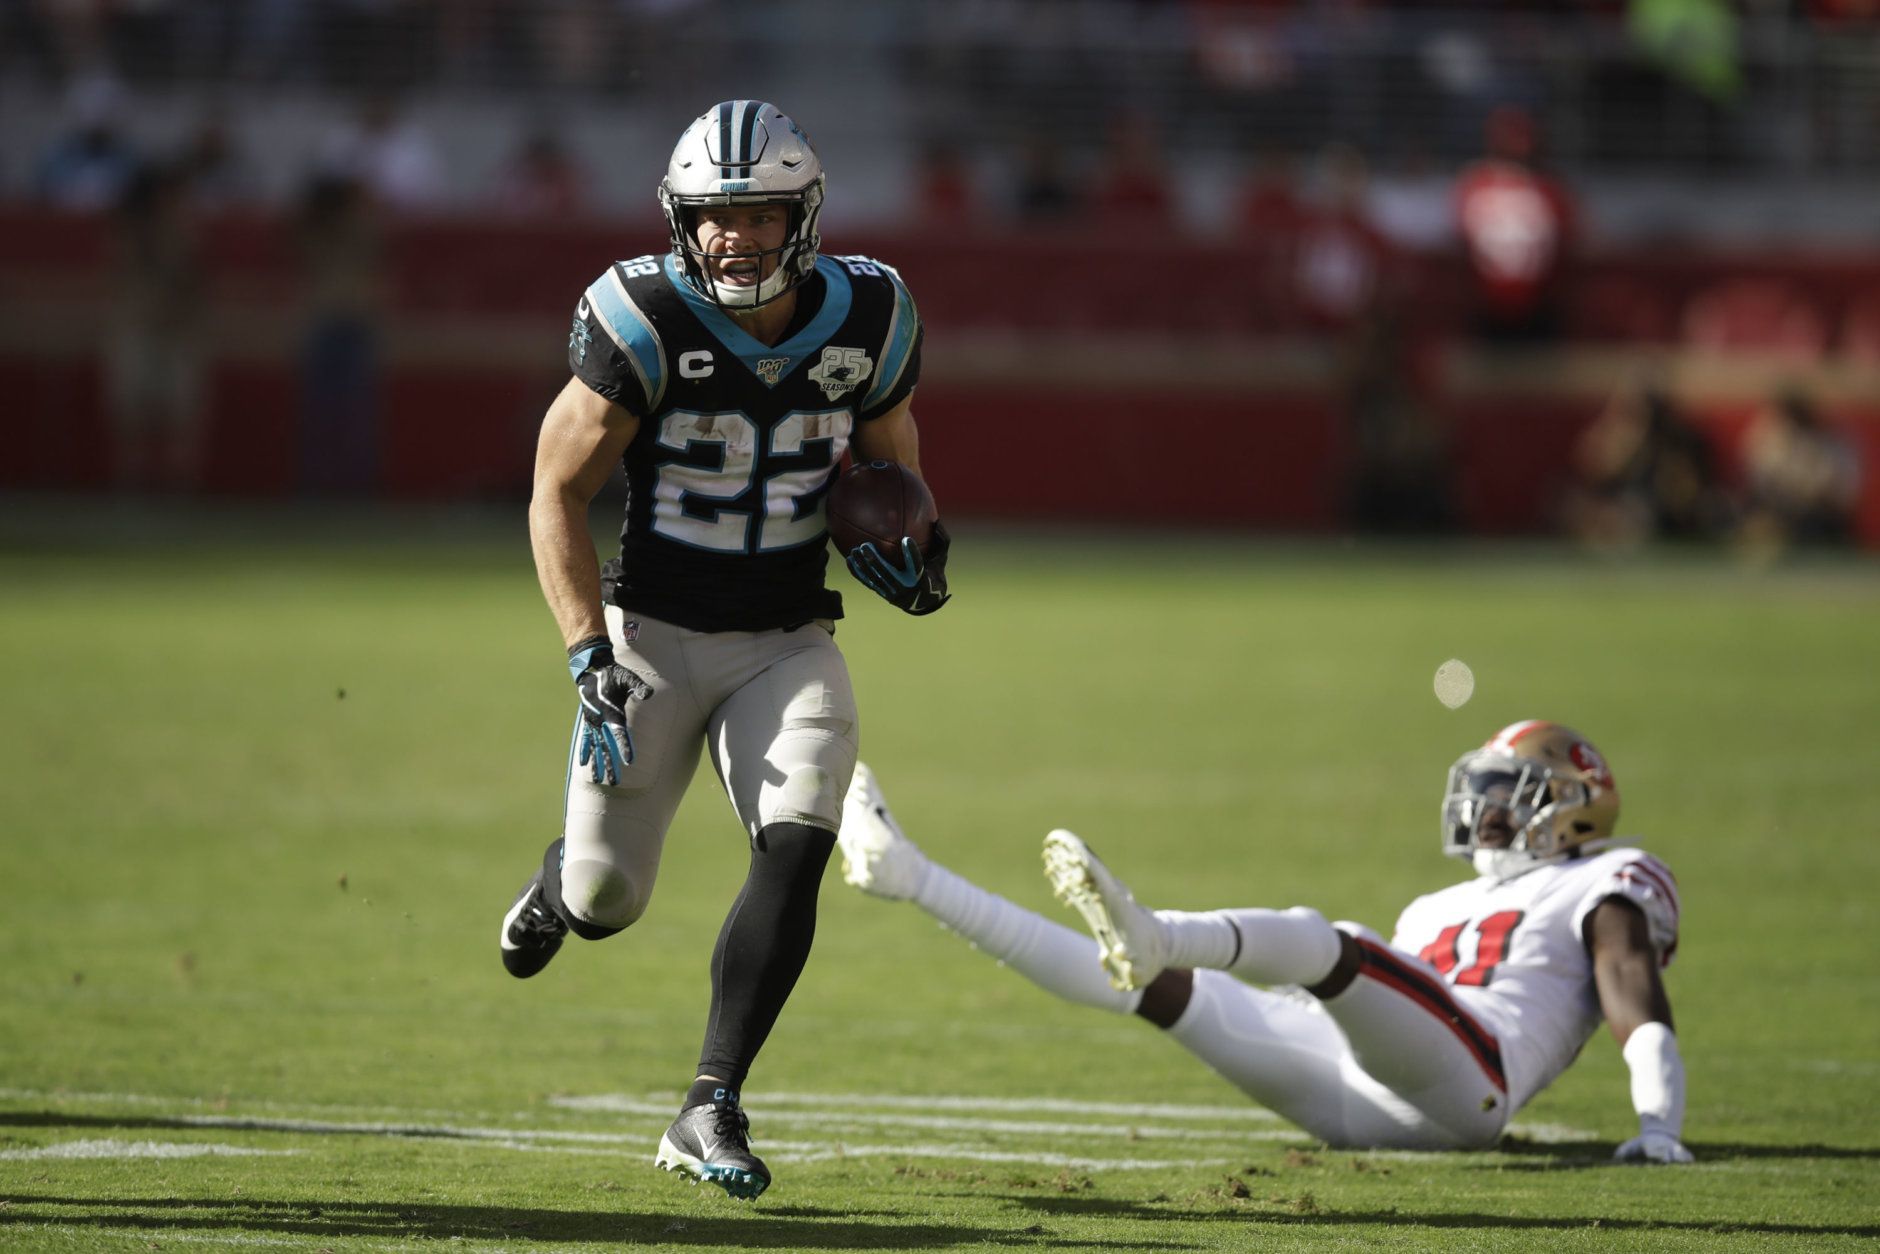 <p><b>Offensive Player of the Year: Christian McCaffrey</b></p>
<p>The single-season record for yards from scrimmage is 2,509. CMC is a legit threat to beat that. The league&#8217;s second-leading rusher is on pace for 2,488 total yards this season and his 13 total touchdowns are tops in the NFL. Oh, and he&#8217;s basically carrying my fantasy team.</p>
<p><i>Honorable mention: Dalvin Cook, Michael Thomas</i></p>
